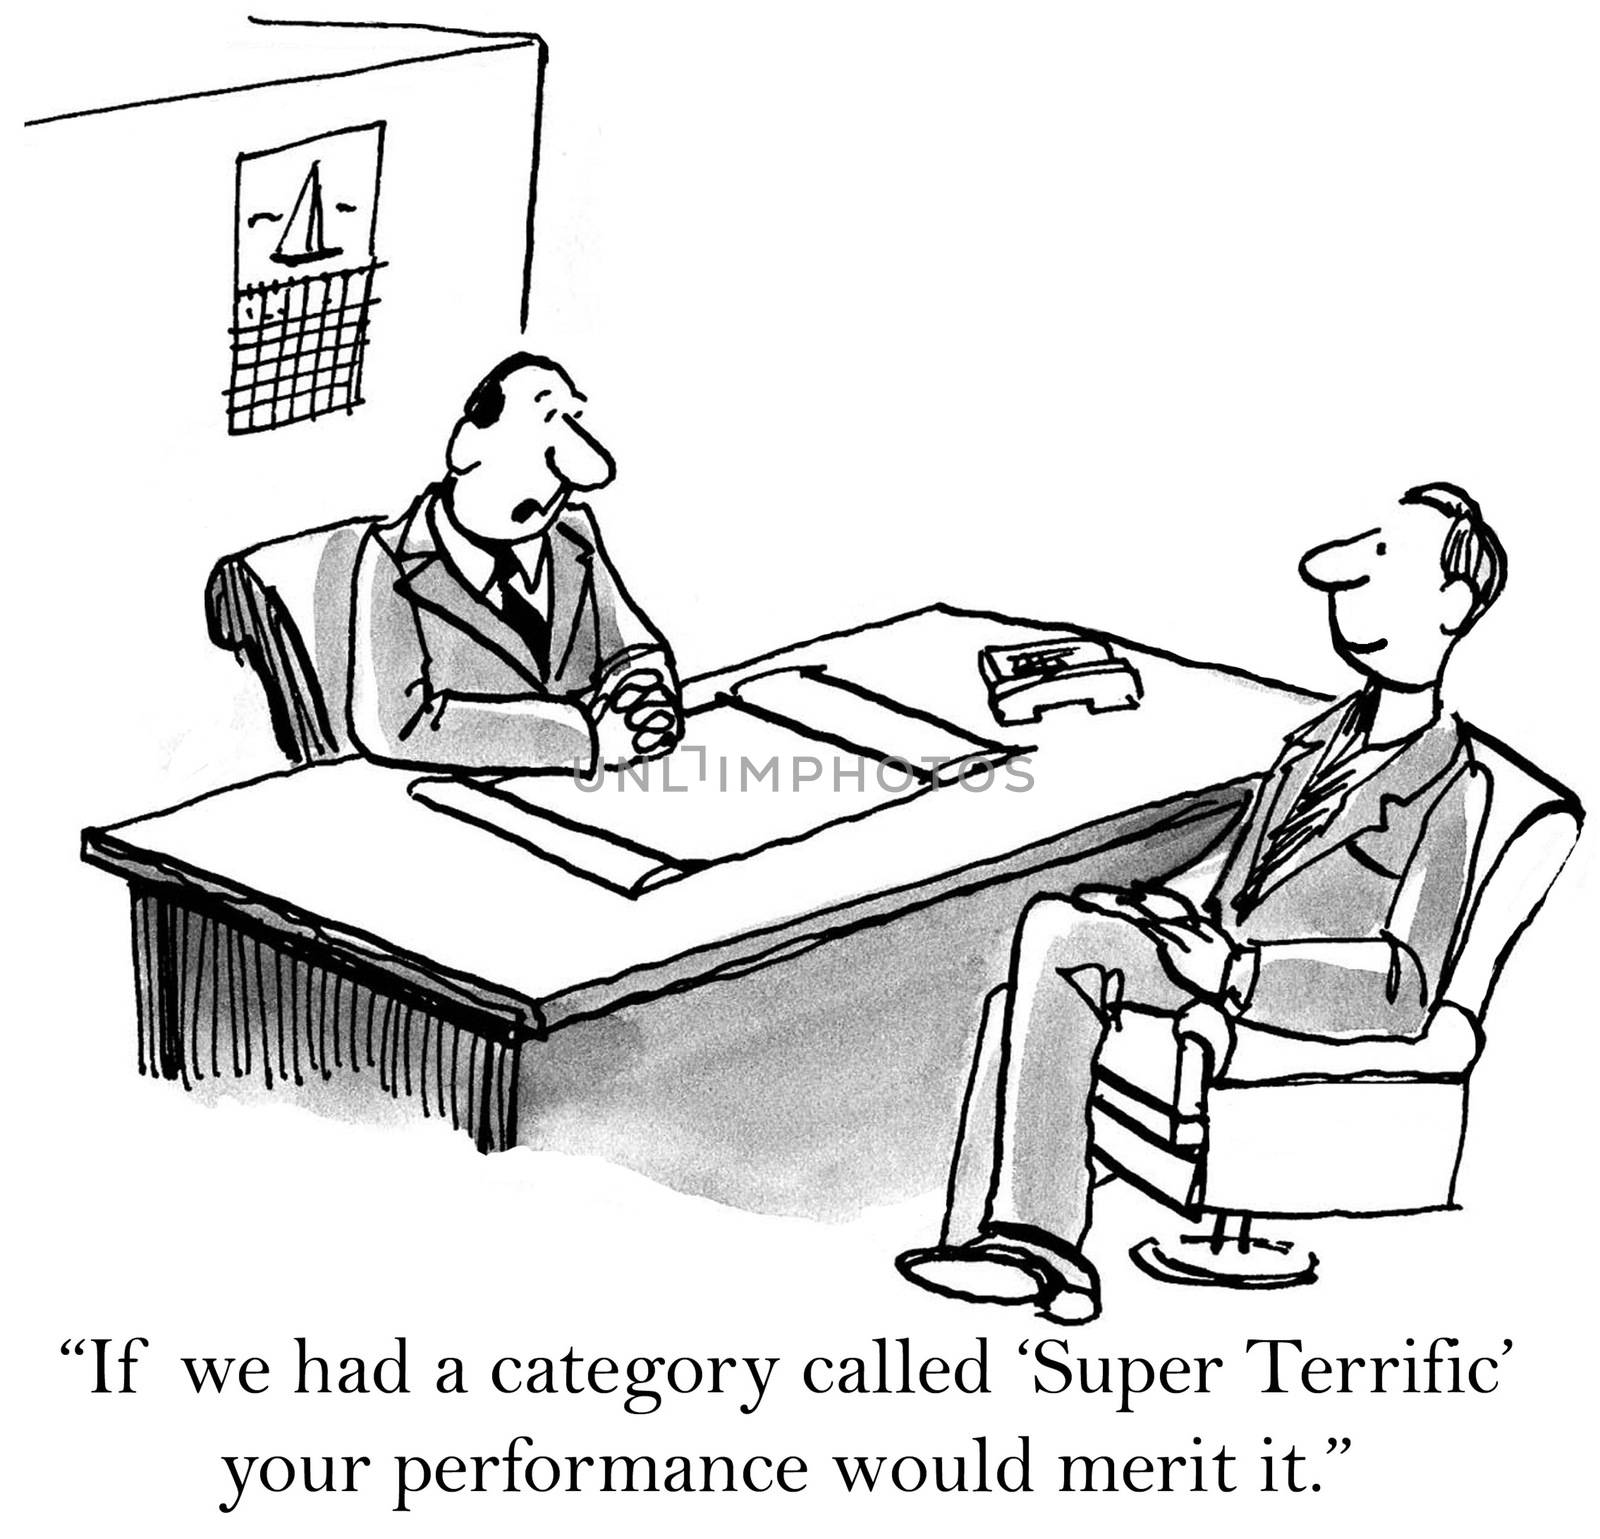 "If we had a category called 'super terrific' your performance would merit it."